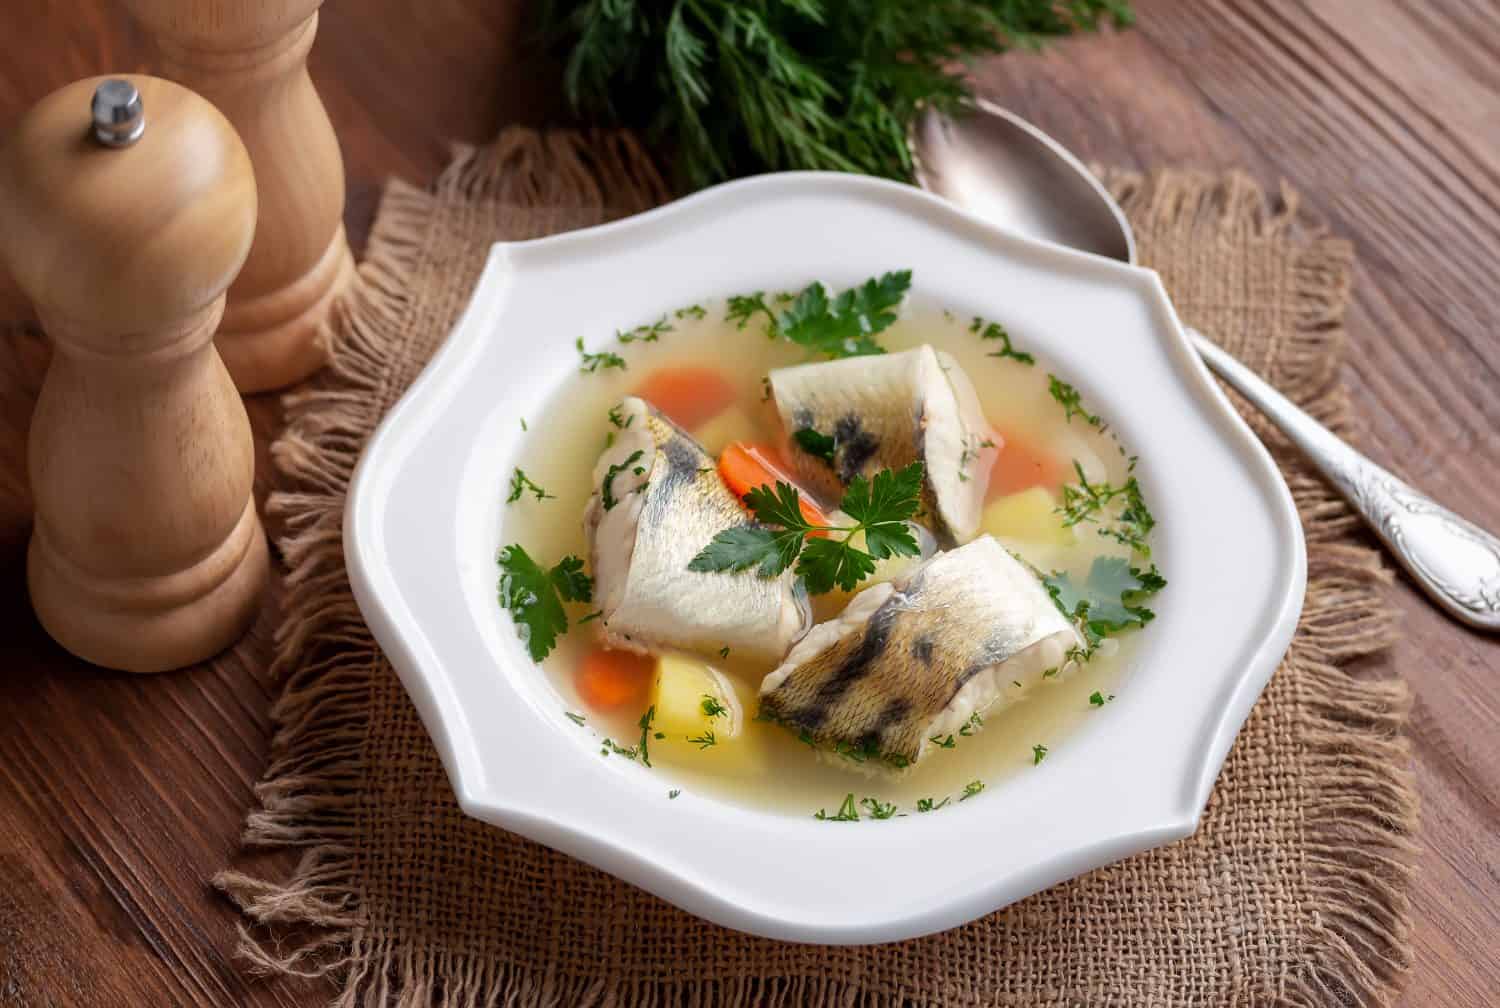 Russian Fish Soup Ukha. White fish in a clear broth with diced root vegetable served in white plate on wooden table. Selective focus.